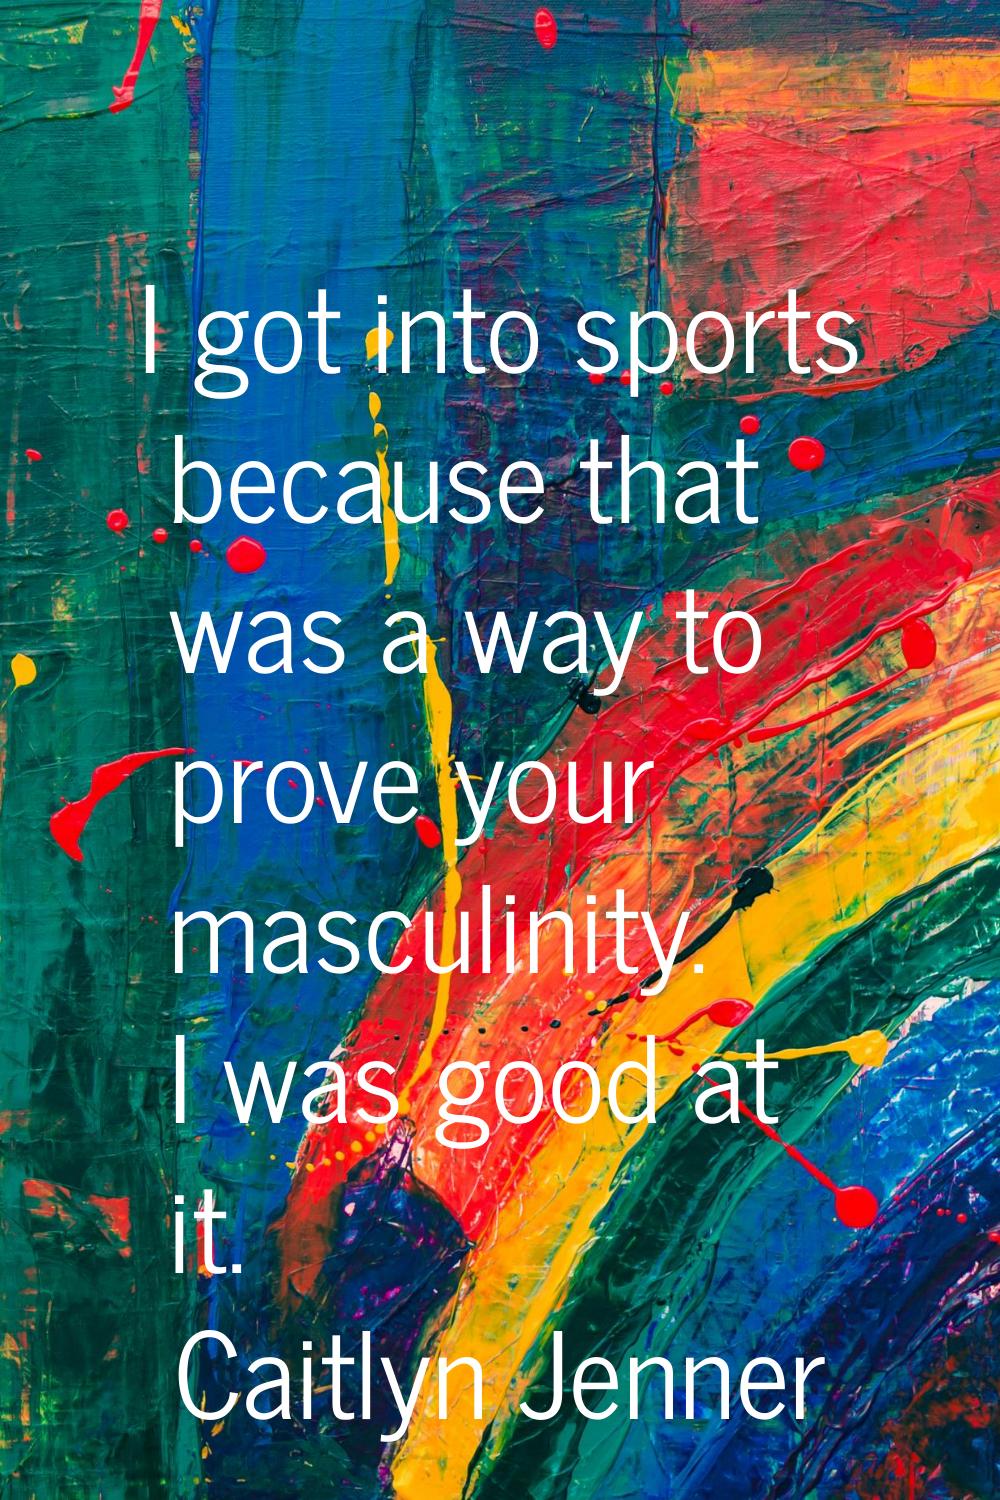 I got into sports because that was a way to prove your masculinity. I was good at it.